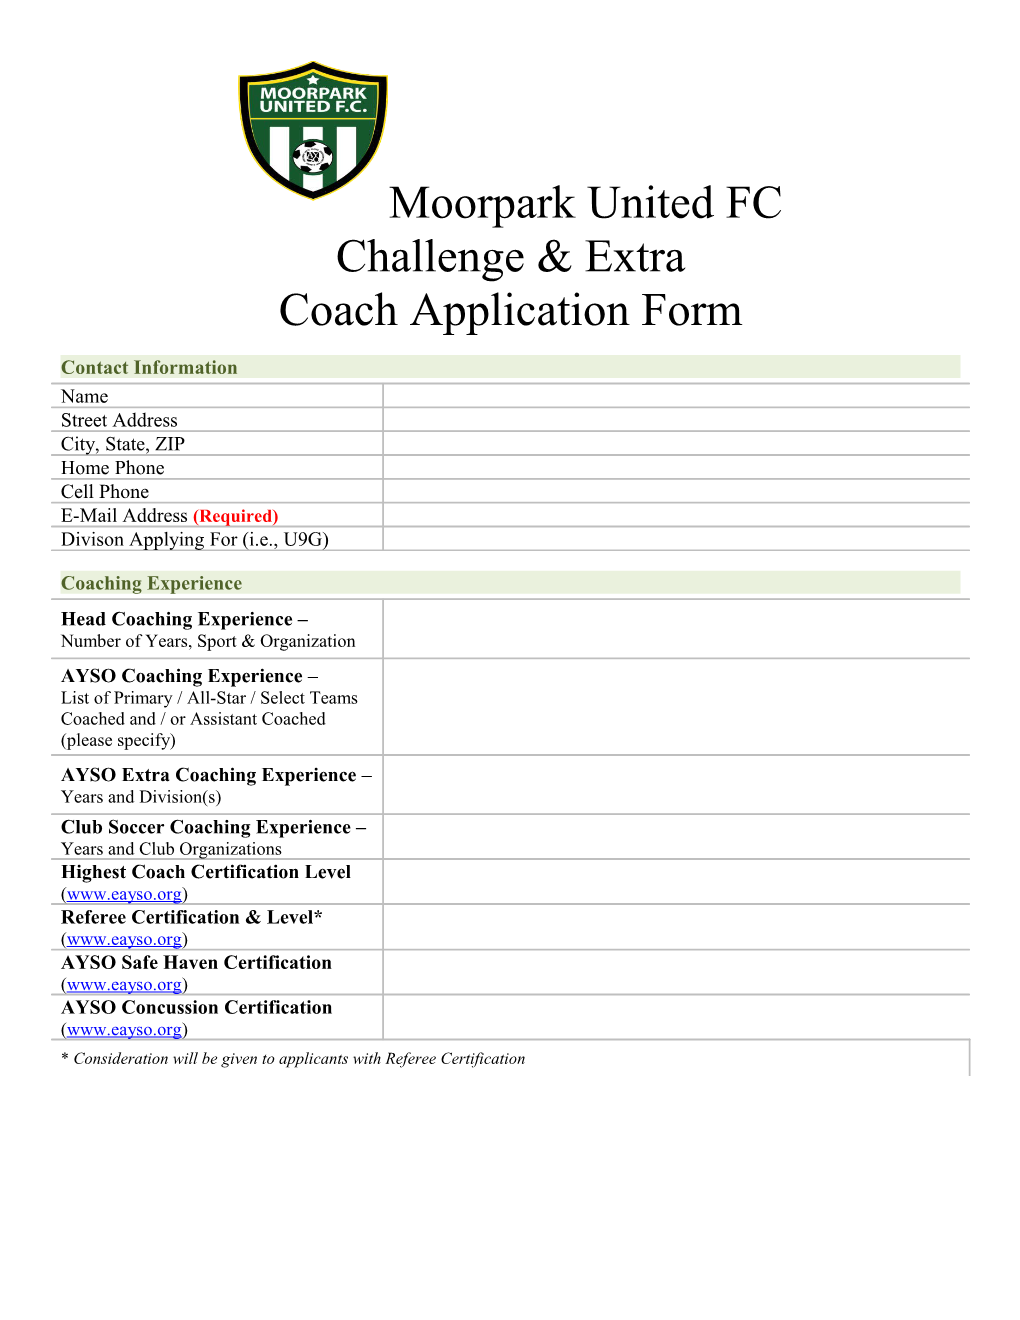 Why Do You Want to Be Anmoorpark United FC Coach?